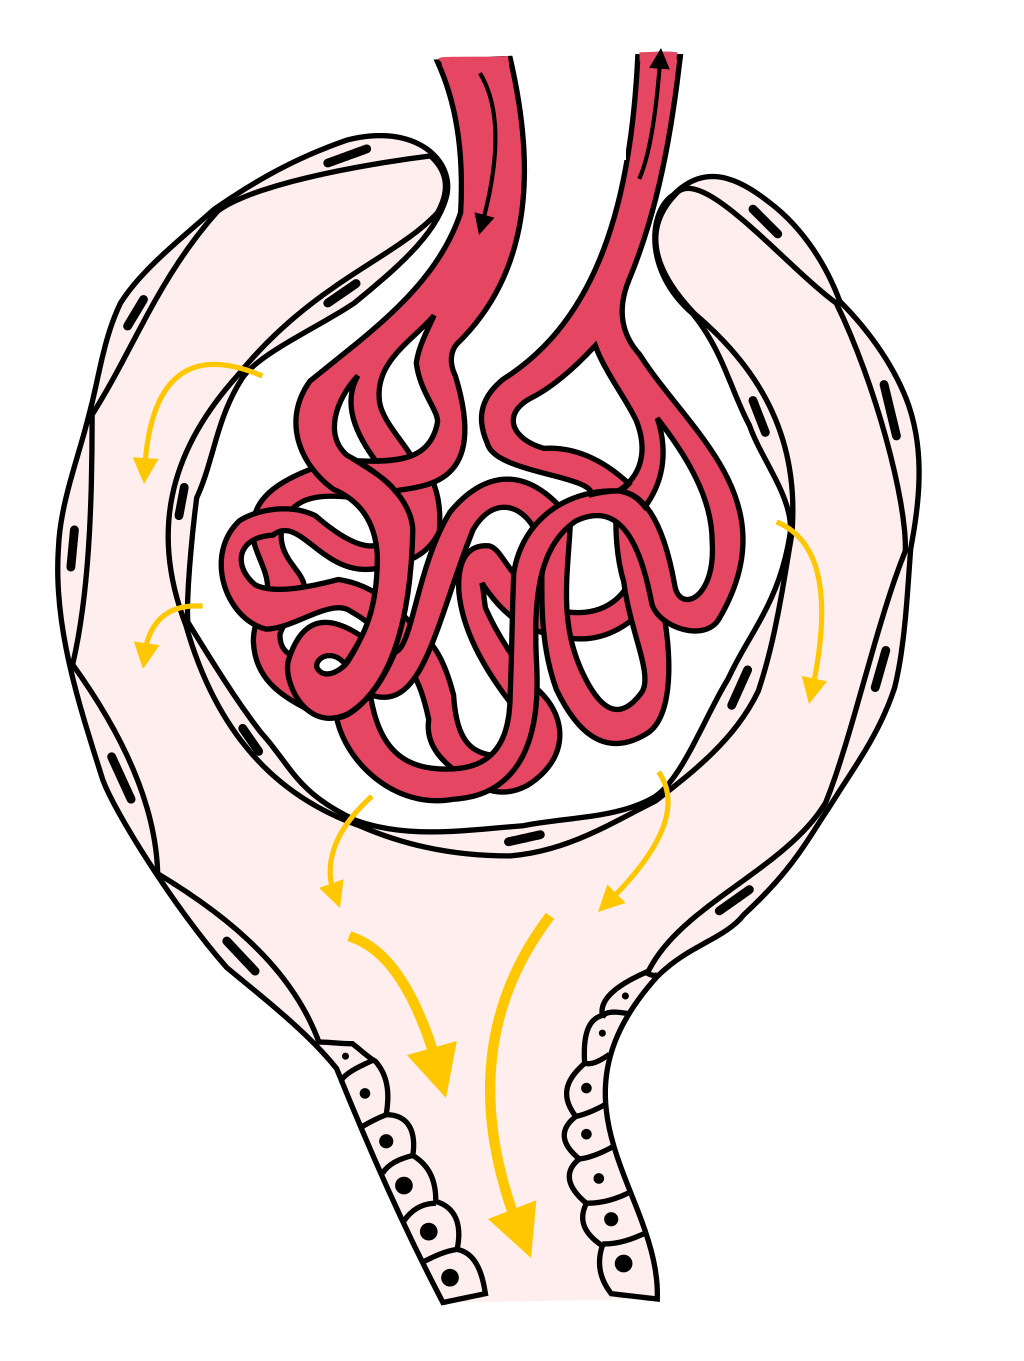 File:Structure of glomerulus.png - Wikimedia Commons